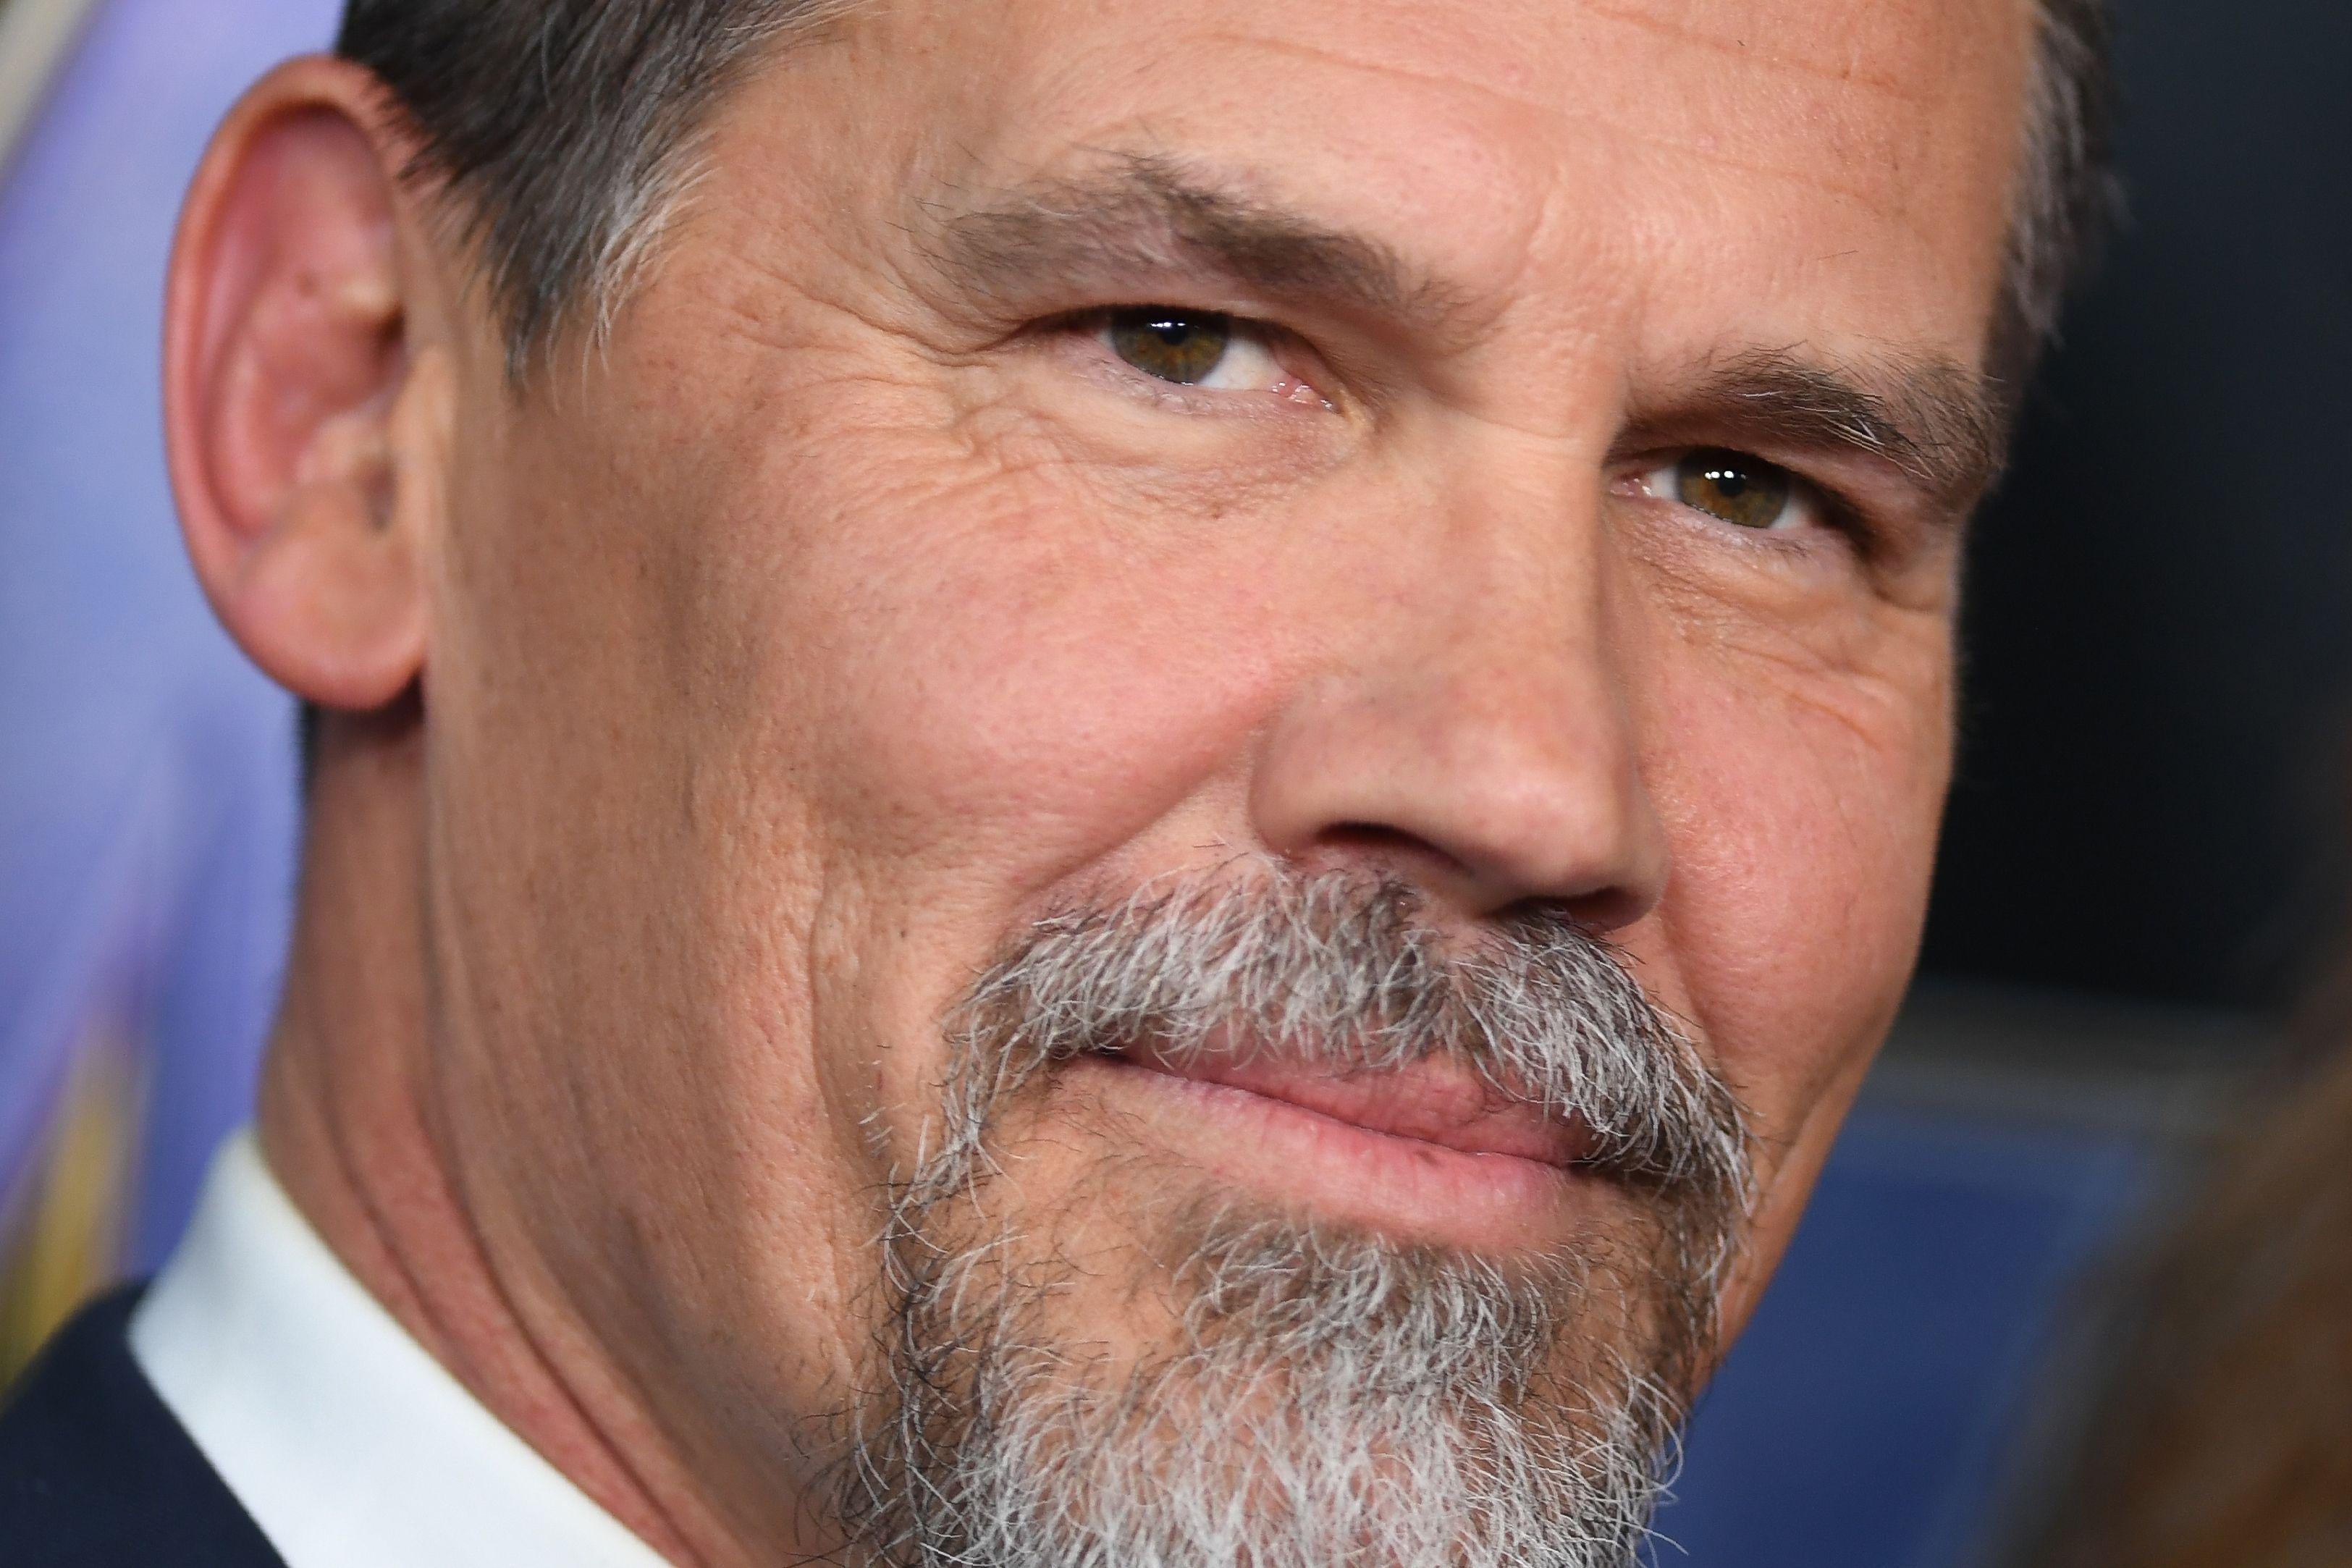 A closeup of Josh Brolin's face on the red carpet at the Avengers: Endgame premiere.